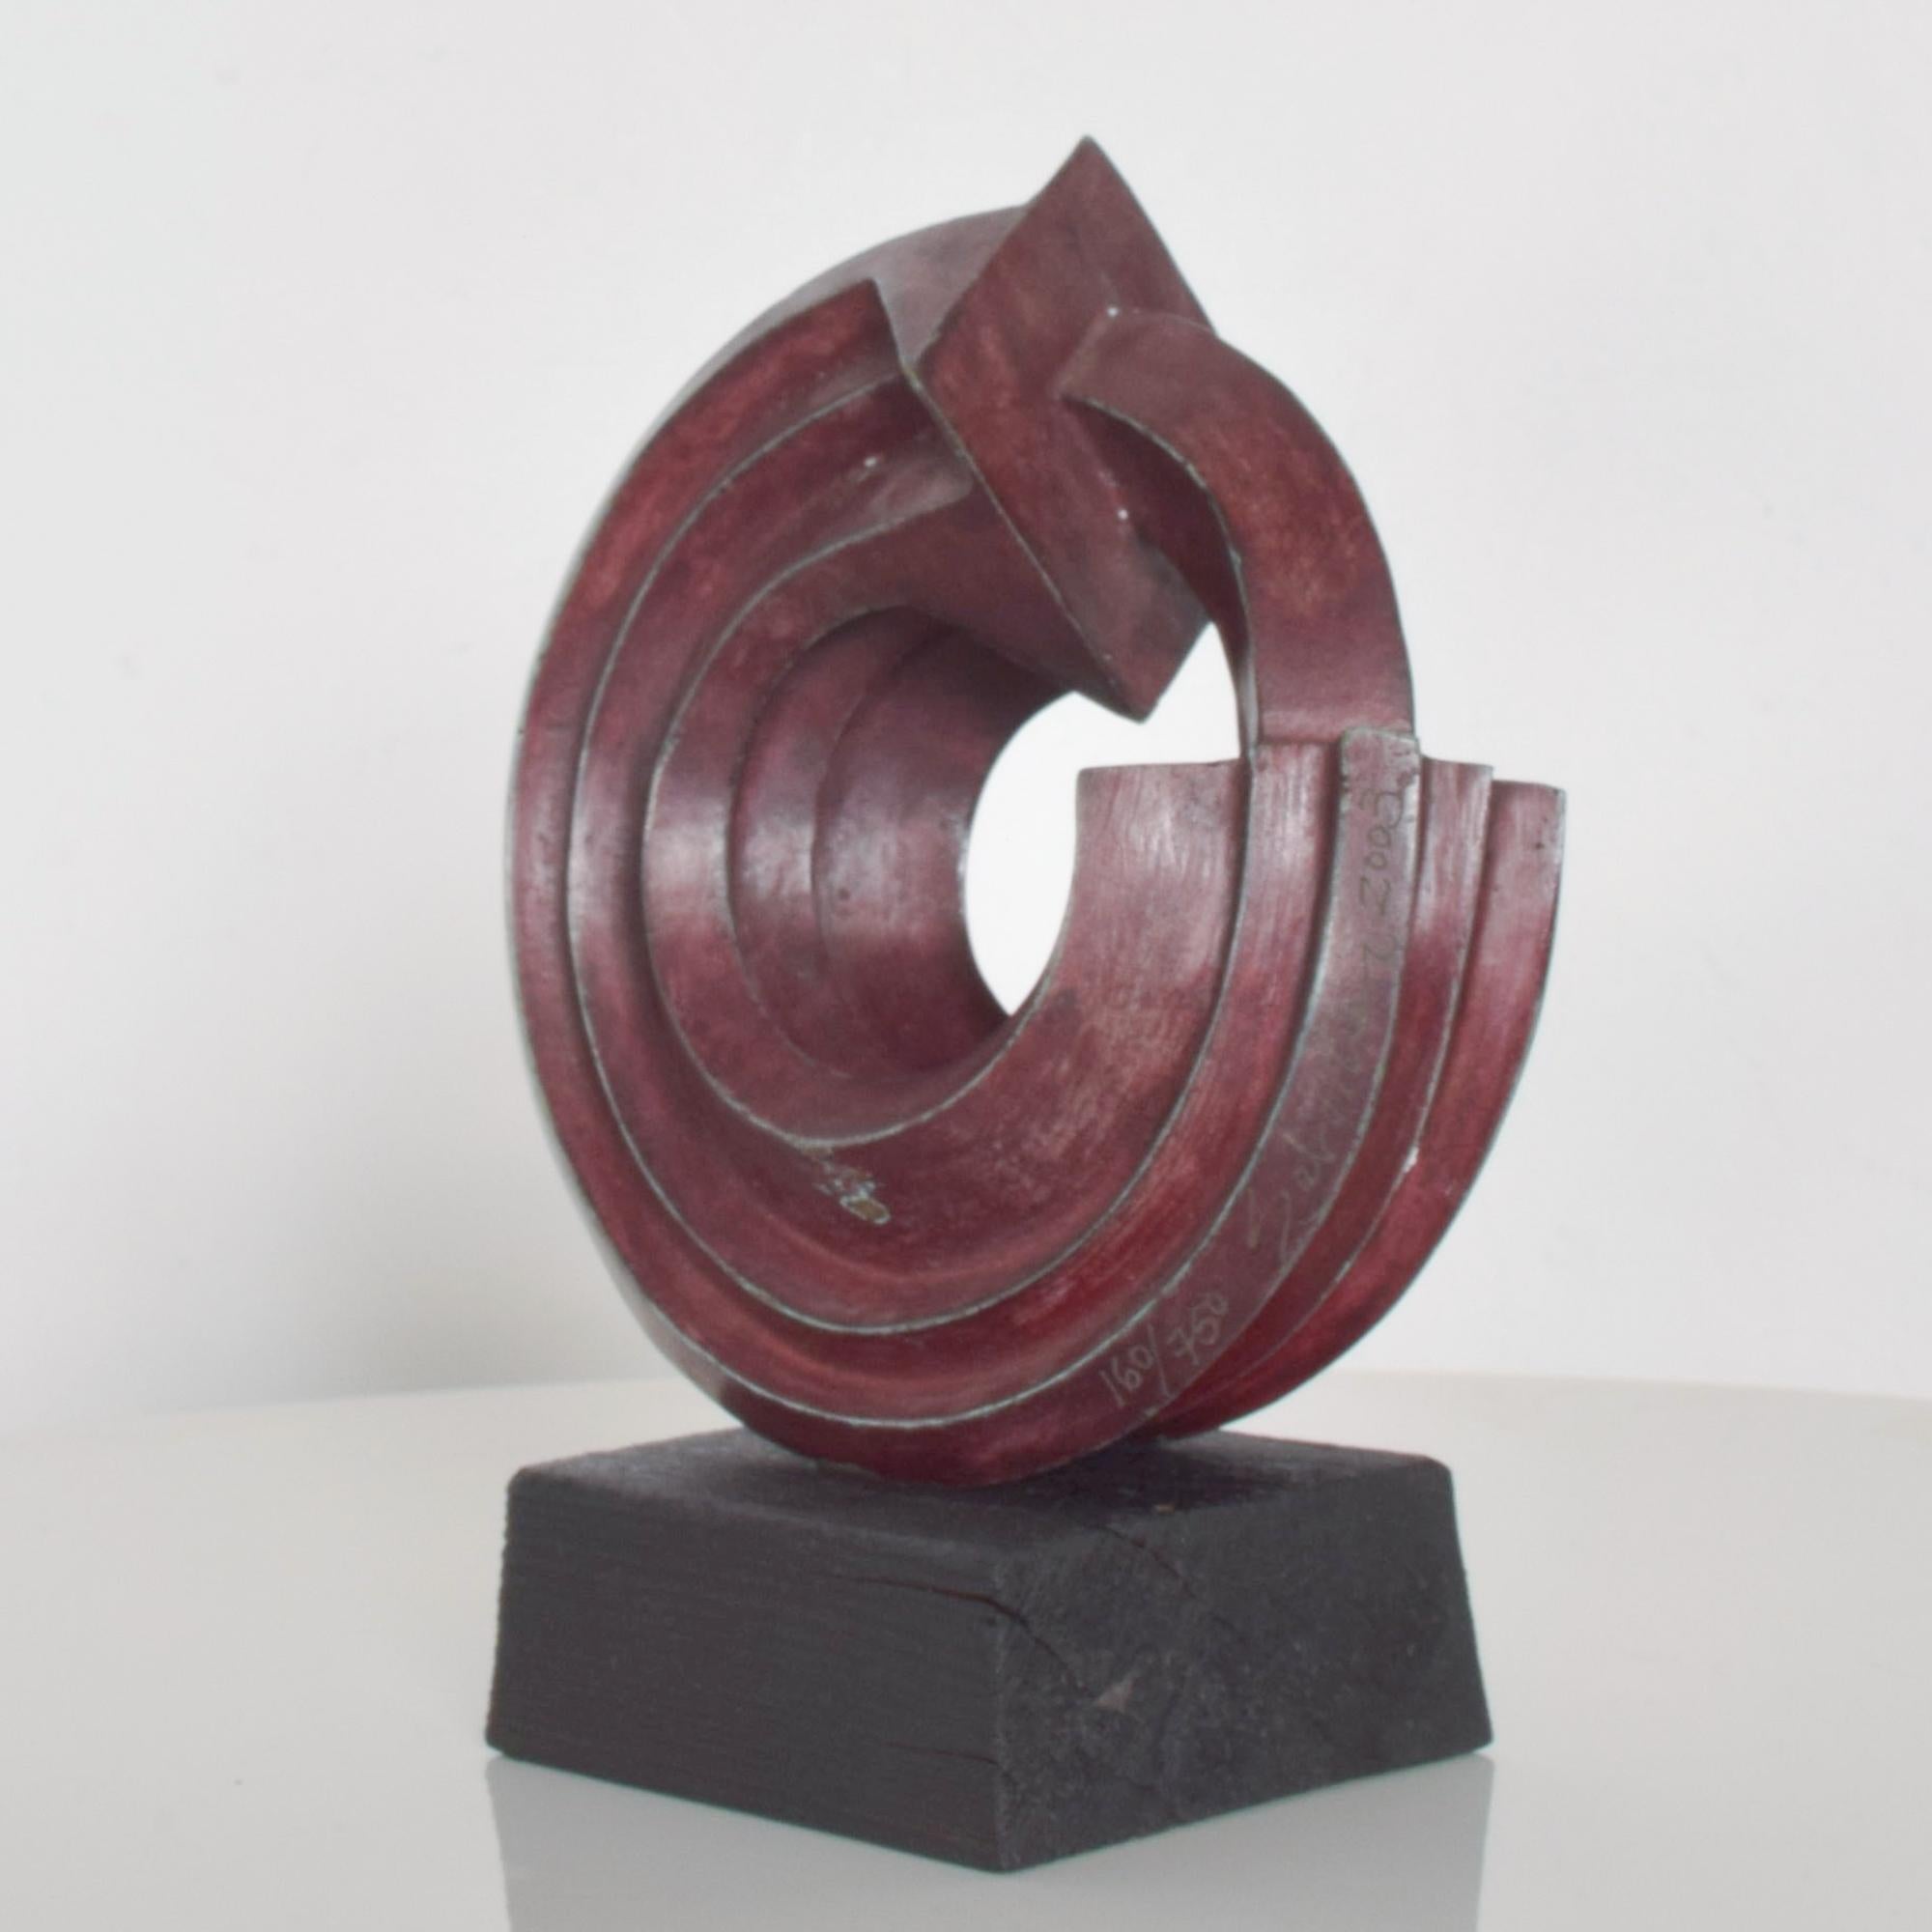 AMBIANIC presents:  Modern Abstract Sculpture by Sebastian the internationally known Sculptor born Enrique Carbajal González from Mexico. 
Sculpture signed by SEBASTIAN 2003, 160/750.
Patinated Bronze. Red Patina. Mounted on Teak Wood. 
Dimensions: